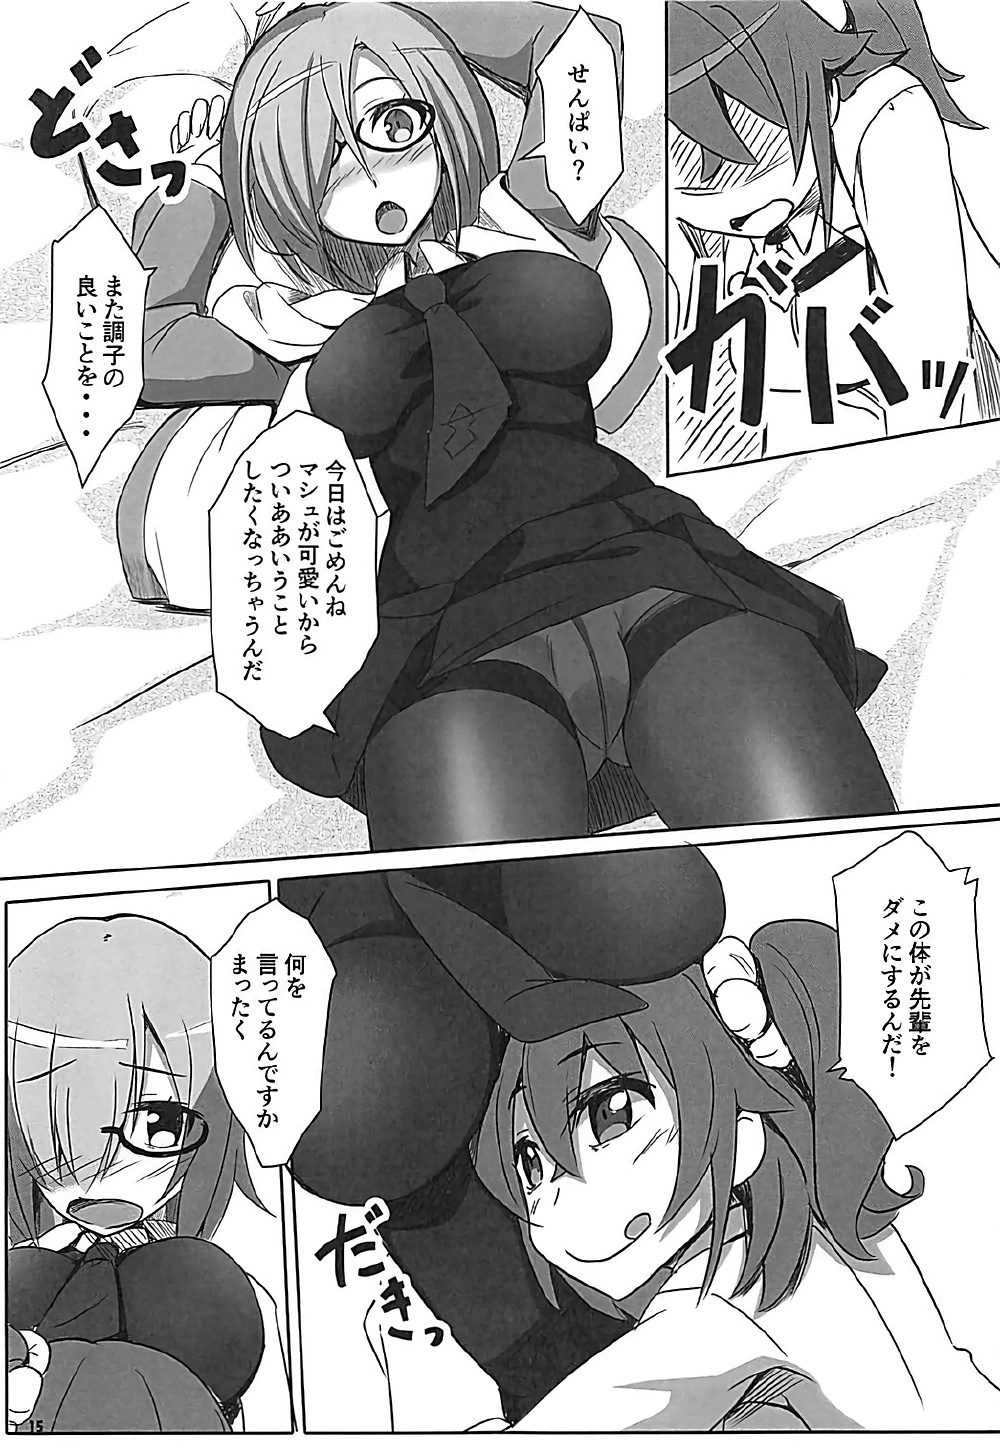 (C92) [Wappoi (Wapokichi)] Chaban Kyougen Mash to Don (Fate/Grand Order) page 16 full